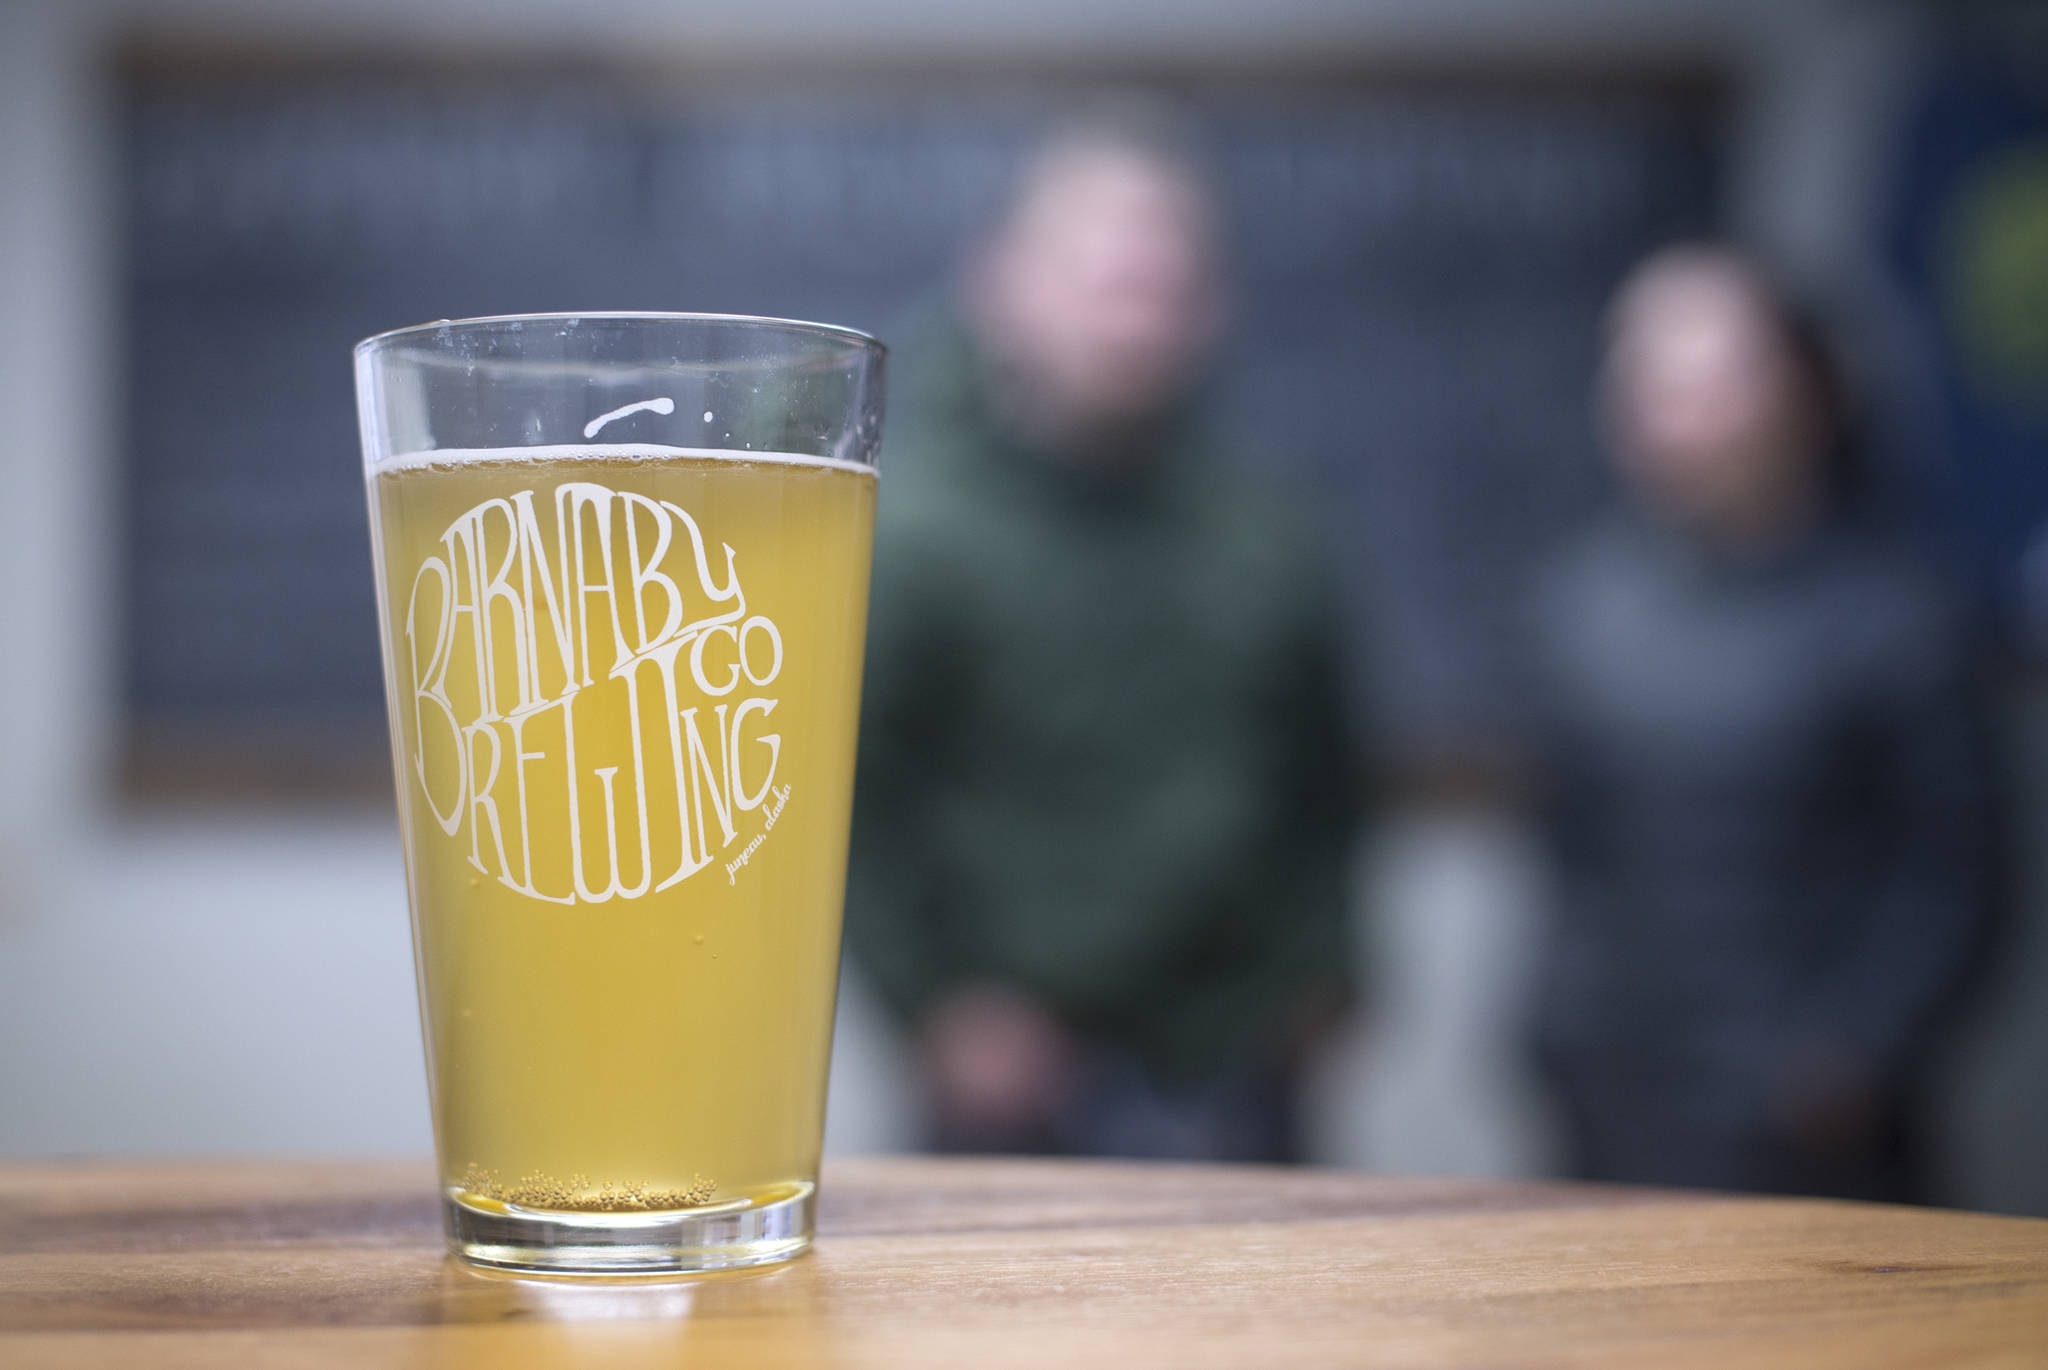 Barnaby Brewing Co., which opened in April, won an award at the international U.S. Open Beer Championships this past weekend. Alaskan Brewing Company also won an award. (Michael Penn | Juneau Empire)